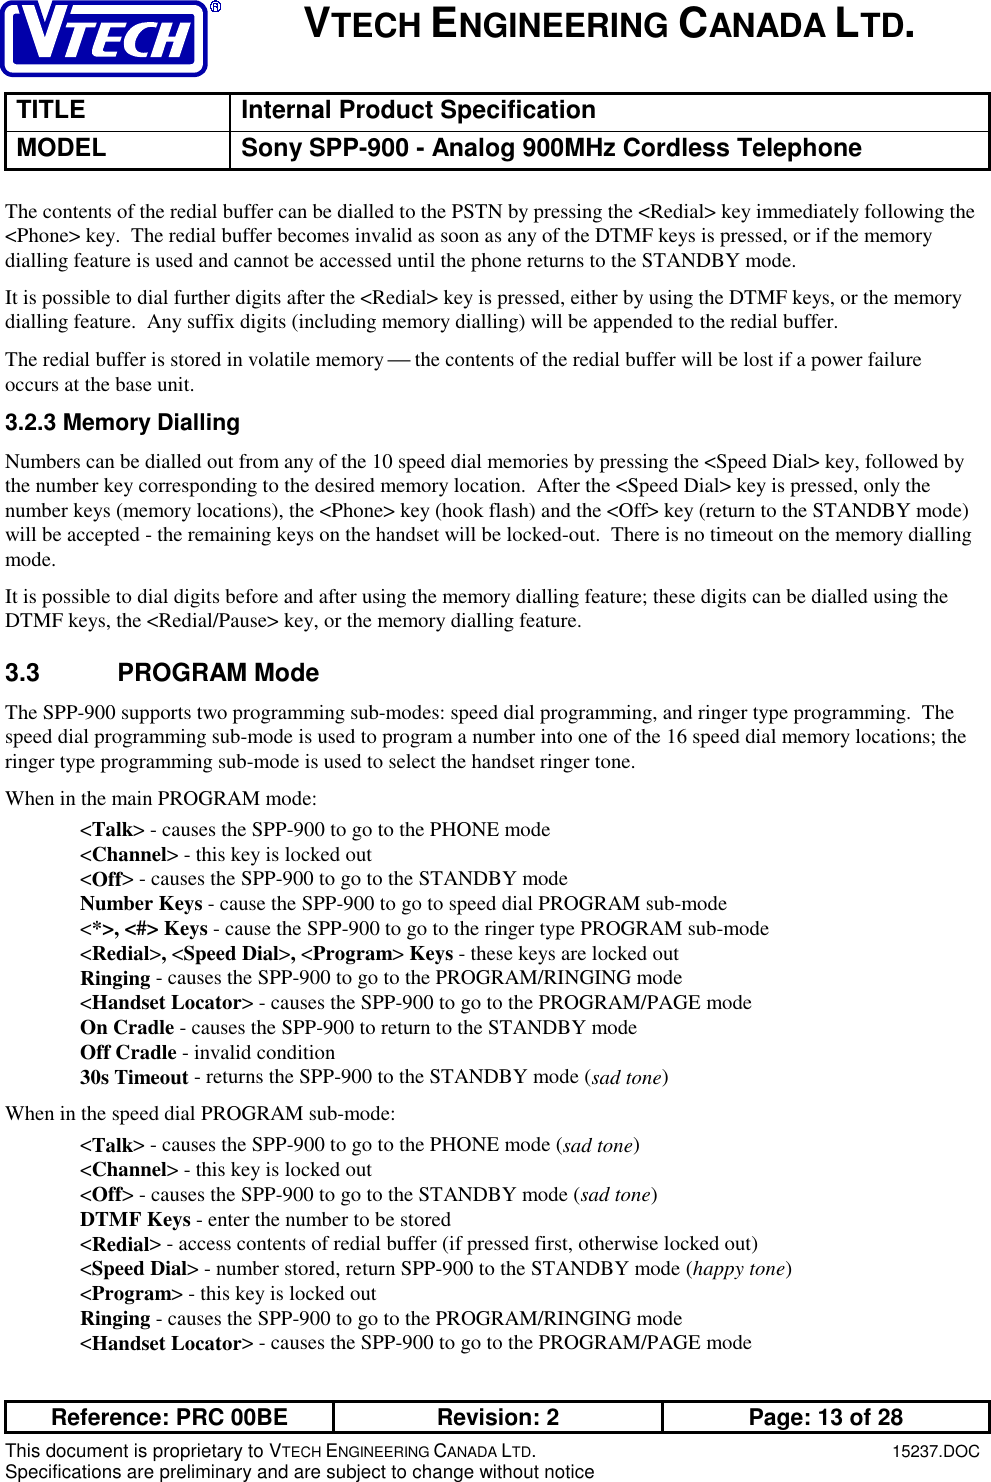 VTECH ENGINEERING CANADA LTD.TITLE Internal Product SpecificationMODEL Sony SPP-900 - Analog 900MHz Cordless TelephoneReference: PRC 00BE Revision: 2 Page: 13 of 28This document is proprietary to VTECH ENGINEERING CANADA LTD.15237.DOCSpecifications are preliminary and are subject to change without noticeThe contents of the redial buffer can be dialled to the PSTN by pressing the &lt;Redial&gt; key immediately following the&lt;Phone&gt; key.  The redial buffer becomes invalid as soon as any of the DTMF keys is pressed, or if the memorydialling feature is used and cannot be accessed until the phone returns to the STANDBY mode.It is possible to dial further digits after the &lt;Redial&gt; key is pressed, either by using the DTMF keys, or the memorydialling feature.  Any suffix digits (including memory dialling) will be appended to the redial buffer.The redial buffer is stored in volatile memory  the contents of the redial buffer will be lost if a power failureoccurs at the base unit.3.2.3 Memory DiallingNumbers can be dialled out from any of the 10 speed dial memories by pressing the &lt;Speed Dial&gt; key, followed bythe number key corresponding to the desired memory location.  After the &lt;Speed Dial&gt; key is pressed, only thenumber keys (memory locations), the &lt;Phone&gt; key (hook flash) and the &lt;Off&gt; key (return to the STANDBY mode)will be accepted - the remaining keys on the handset will be locked-out.  There is no timeout on the memory diallingmode.It is possible to dial digits before and after using the memory dialling feature; these digits can be dialled using theDTMF keys, the &lt;Redial/Pause&gt; key, or the memory dialling feature.3.3 PROGRAM ModeThe SPP-900 supports two programming sub-modes: speed dial programming, and ringer type programming.  Thespeed dial programming sub-mode is used to program a number into one of the 16 speed dial memory locations; theringer type programming sub-mode is used to select the handset ringer tone.When in the main PROGRAM mode:&lt;Talk&gt; - causes the SPP-900 to go to the PHONE mode&lt;Channel&gt; - this key is locked out&lt;Off&gt; - causes the SPP-900 to go to the STANDBY modeNumber Keys - cause the SPP-900 to go to speed dial PROGRAM sub-mode&lt;*&gt;, &lt;#&gt; Keys - cause the SPP-900 to go to the ringer type PROGRAM sub-mode&lt;Redial&gt;, &lt;Speed Dial&gt;, &lt;Program&gt; Keys - these keys are locked outRinging - causes the SPP-900 to go to the PROGRAM/RINGING mode&lt;Handset Locator&gt; - causes the SPP-900 to go to the PROGRAM/PAGE modeOn Cradle - causes the SPP-900 to return to the STANDBY modeOff Cradle - invalid condition30s Timeout - returns the SPP-900 to the STANDBY mode (sad tone)When in the speed dial PROGRAM sub-mode:&lt;Talk&gt; - causes the SPP-900 to go to the PHONE mode (sad tone)&lt;Channel&gt; - this key is locked out&lt;Off&gt; - causes the SPP-900 to go to the STANDBY mode (sad tone)DTMF Keys - enter the number to be stored&lt;Redial&gt; - access contents of redial buffer (if pressed first, otherwise locked out)&lt;Speed Dial&gt; - number stored, return SPP-900 to the STANDBY mode (happy tone)&lt;Program&gt; - this key is locked outRinging - causes the SPP-900 to go to the PROGRAM/RINGING mode&lt;Handset Locator&gt; - causes the SPP-900 to go to the PROGRAM/PAGE mode